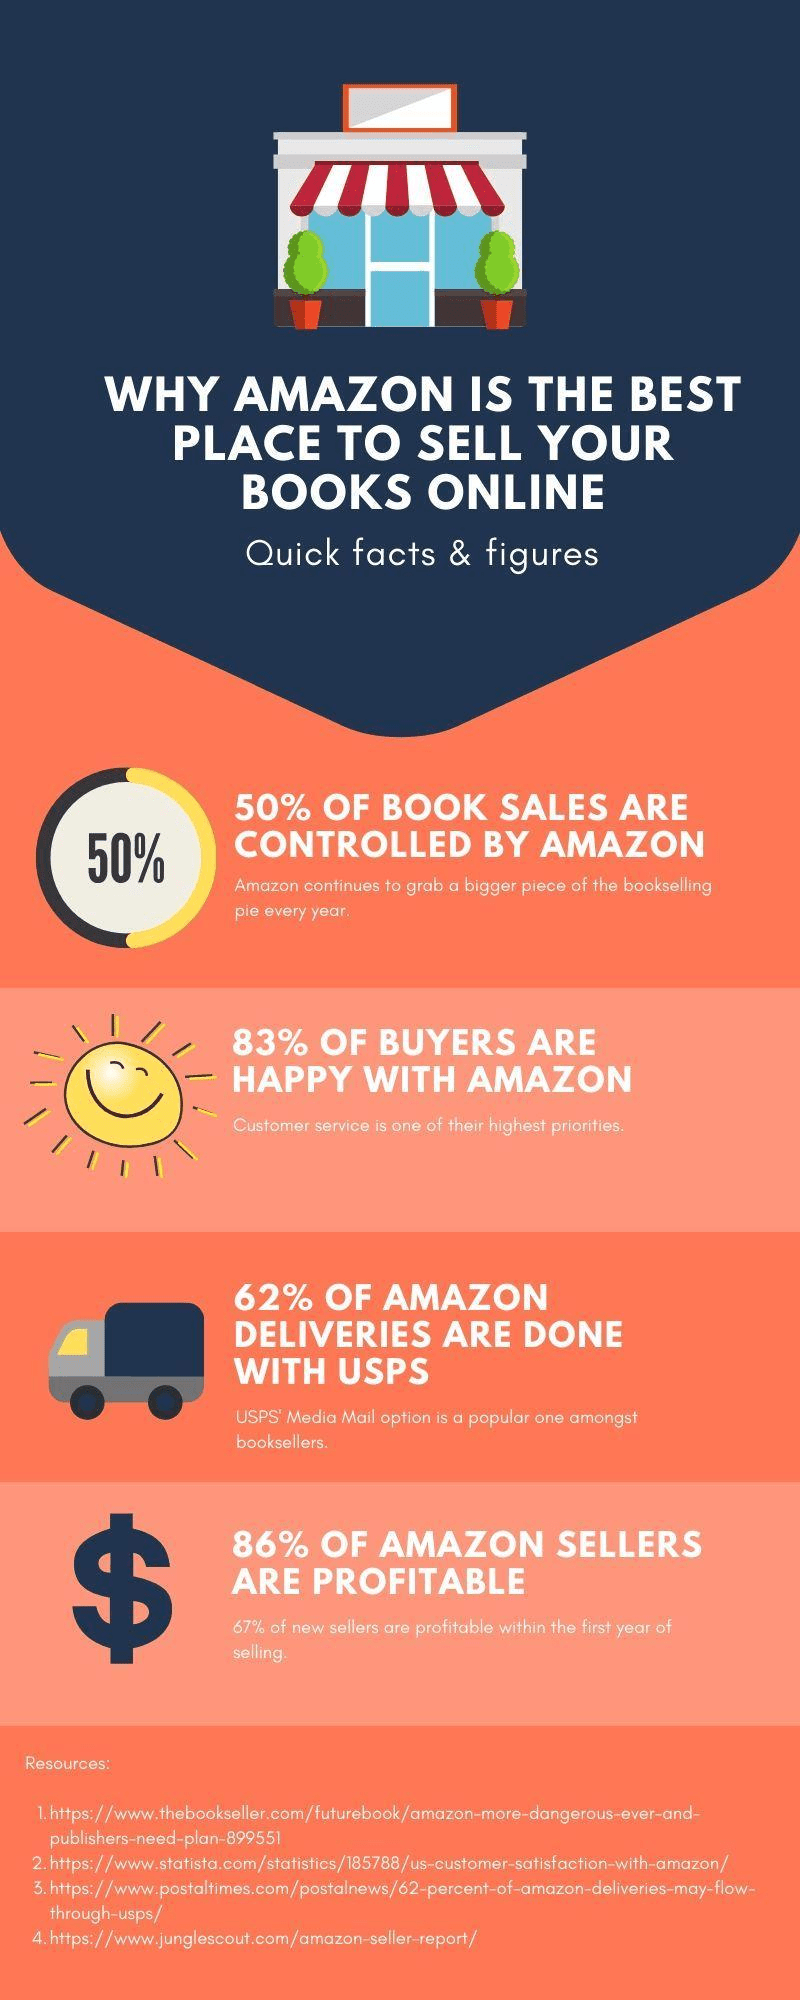 Why Amazon is the best place to sell books